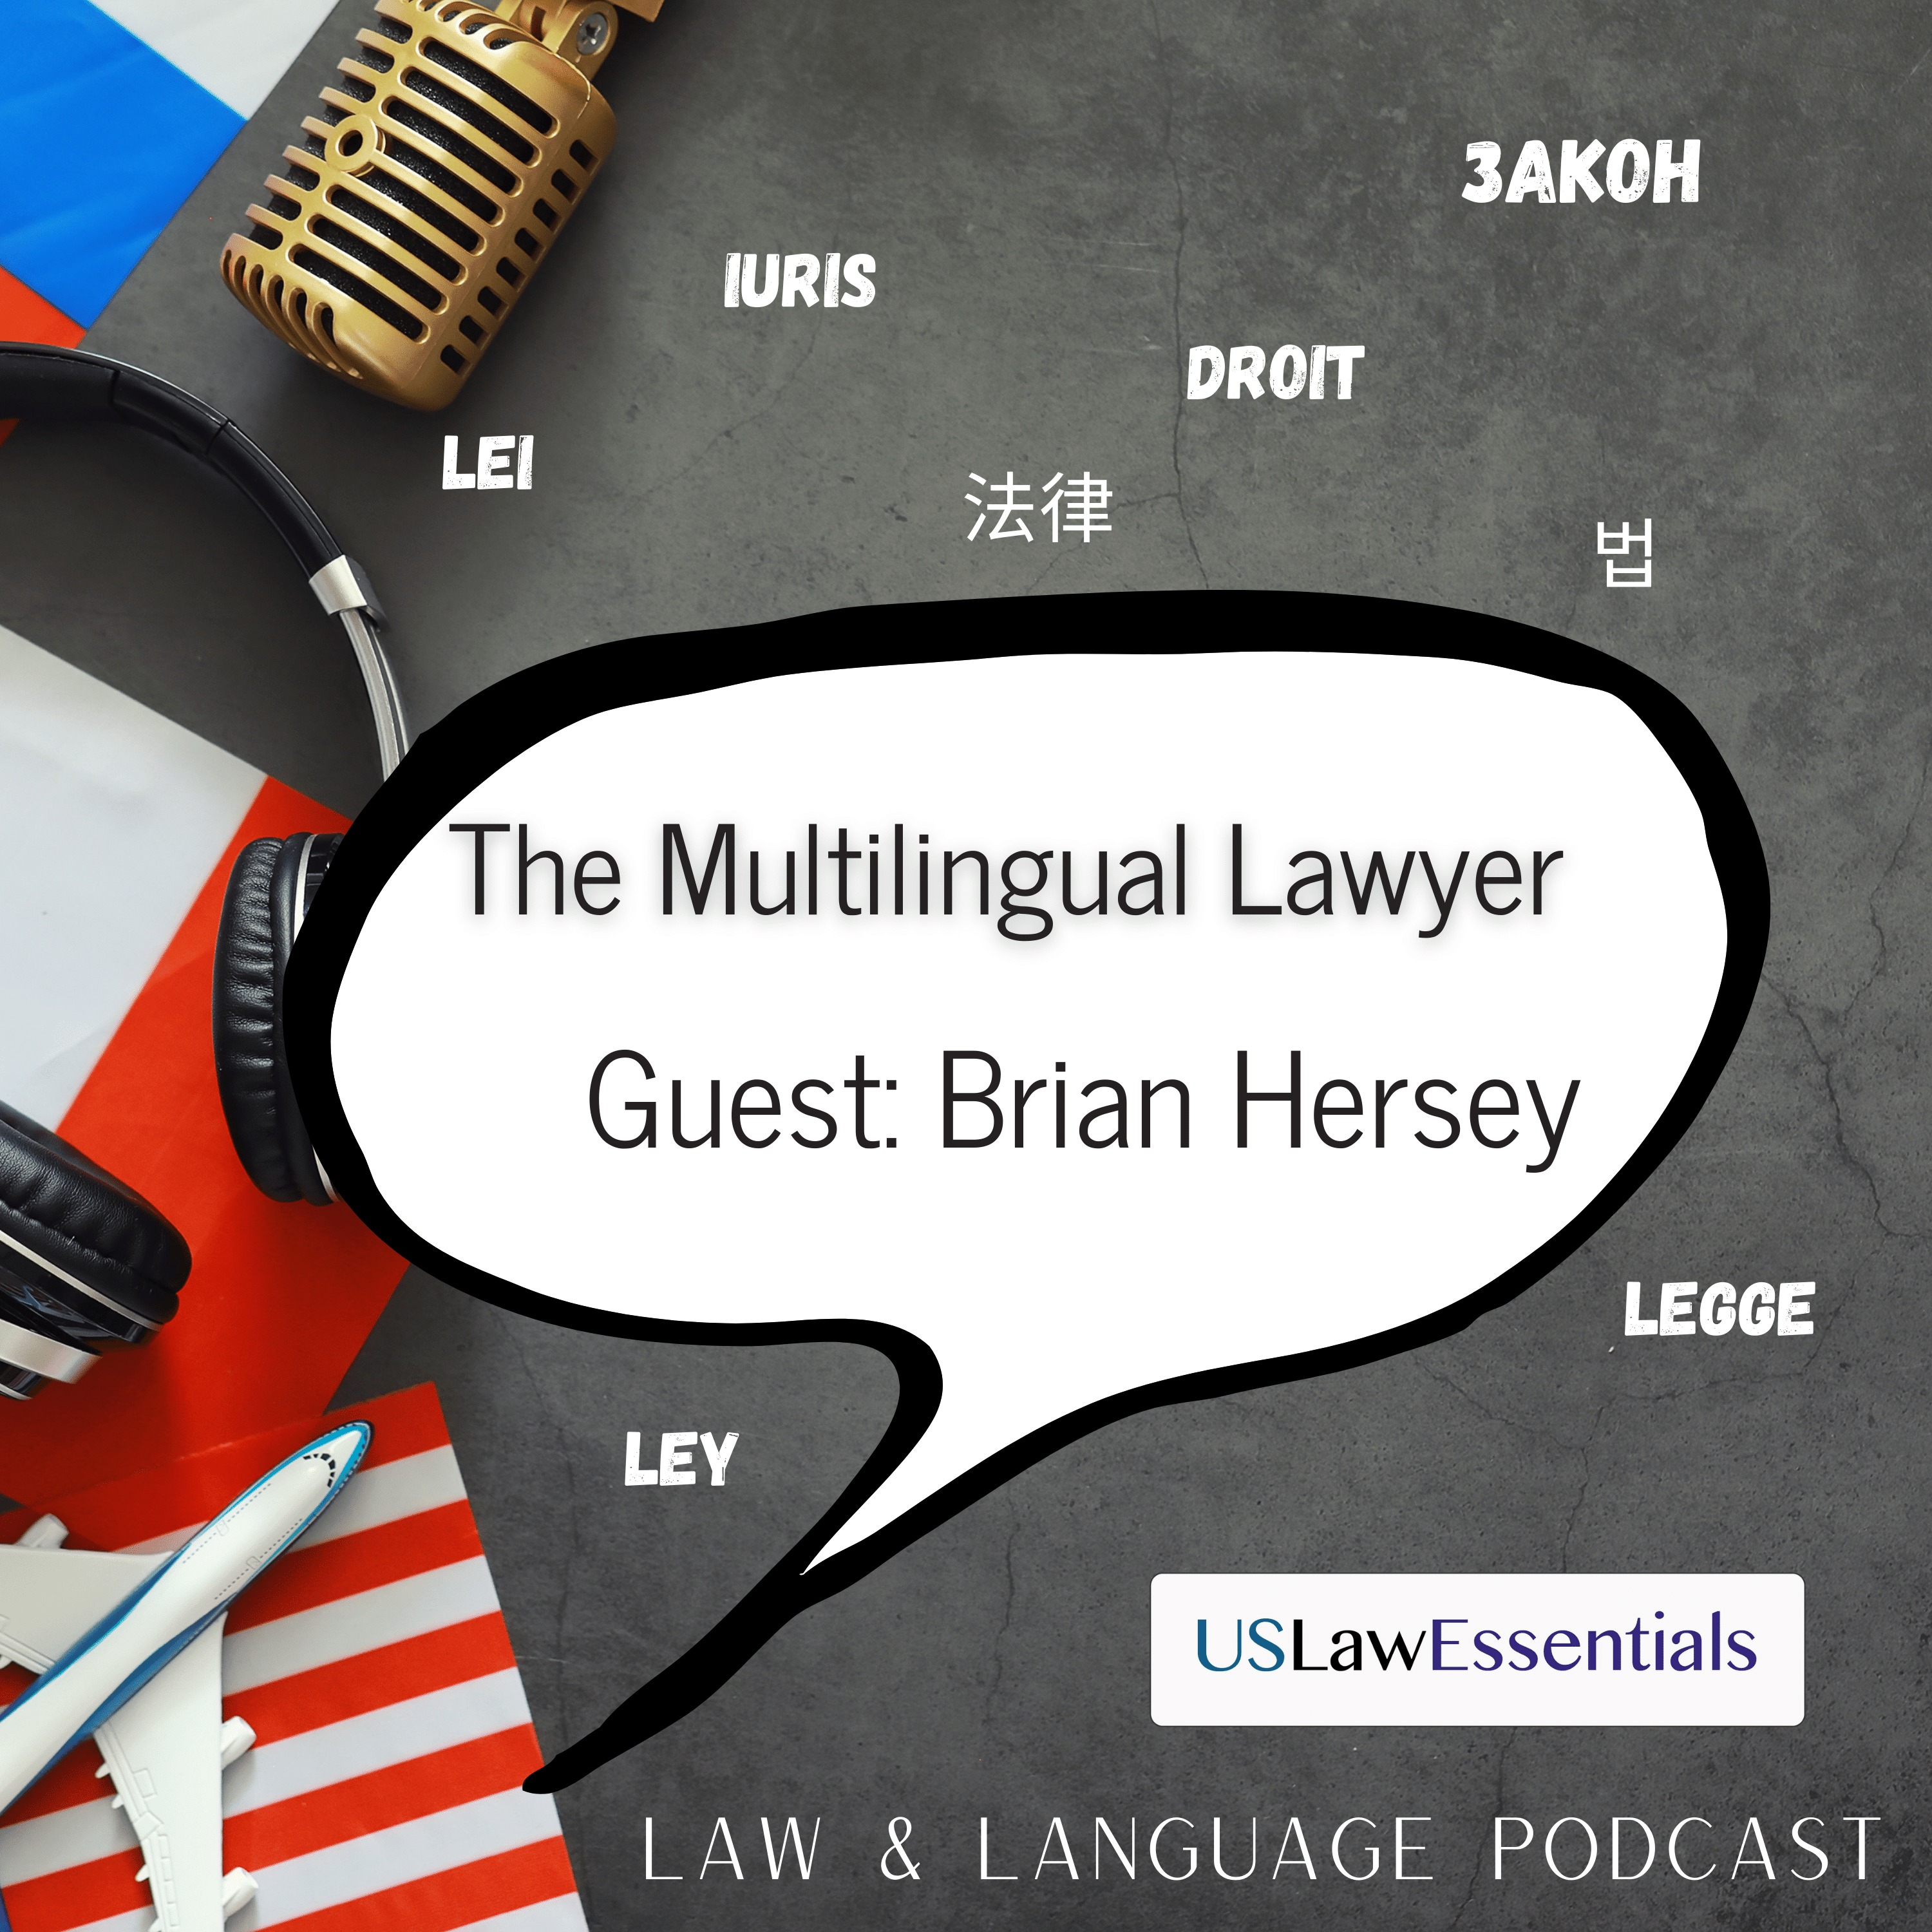 The Multilingual Lawyer: Brian Hersey